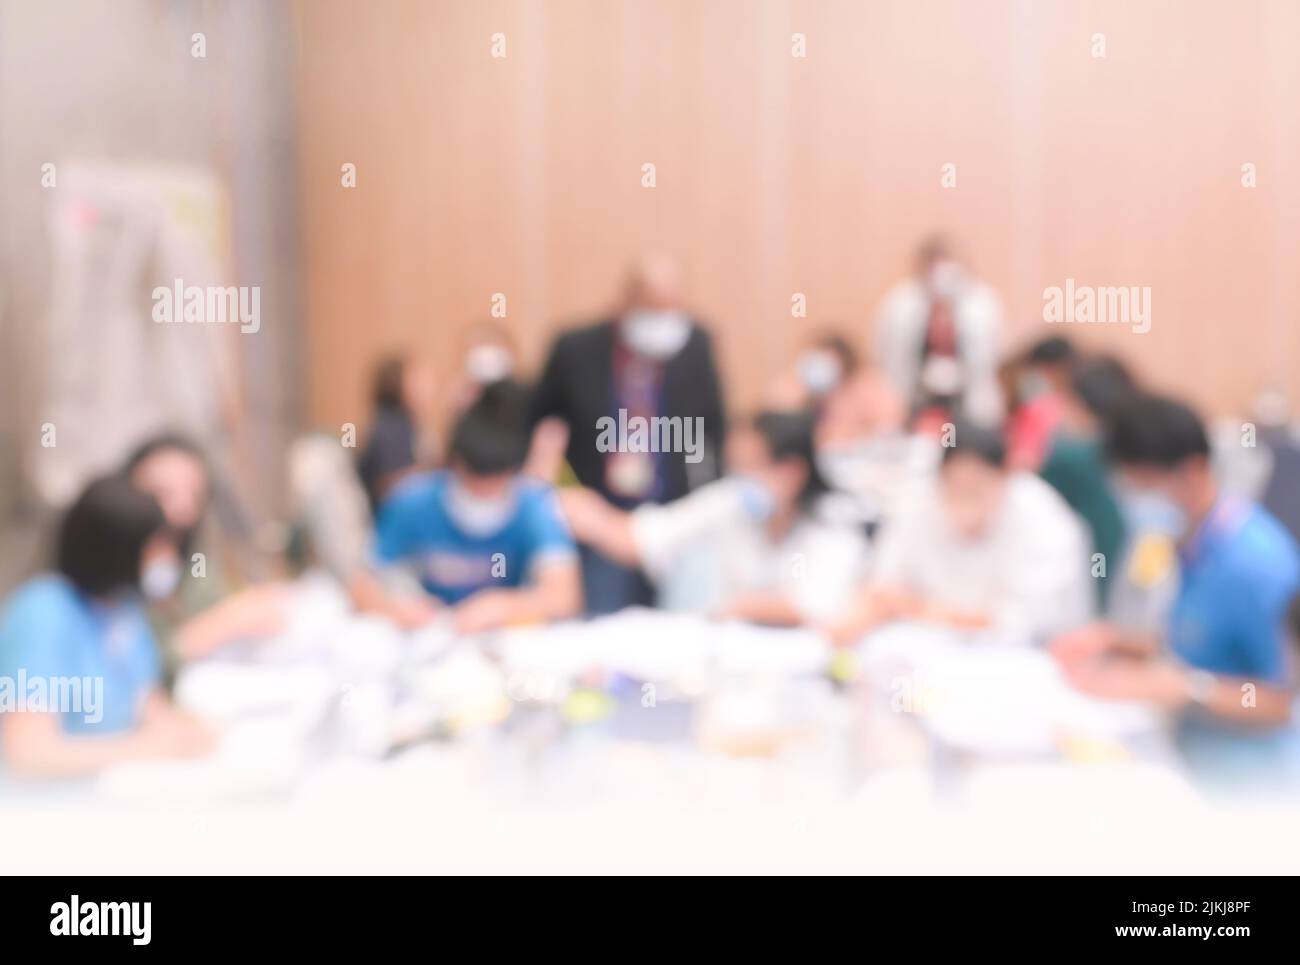 Table Top Background on blurred people lecture in seminar room education or meetting concept,abstract blur people background Stock Photo